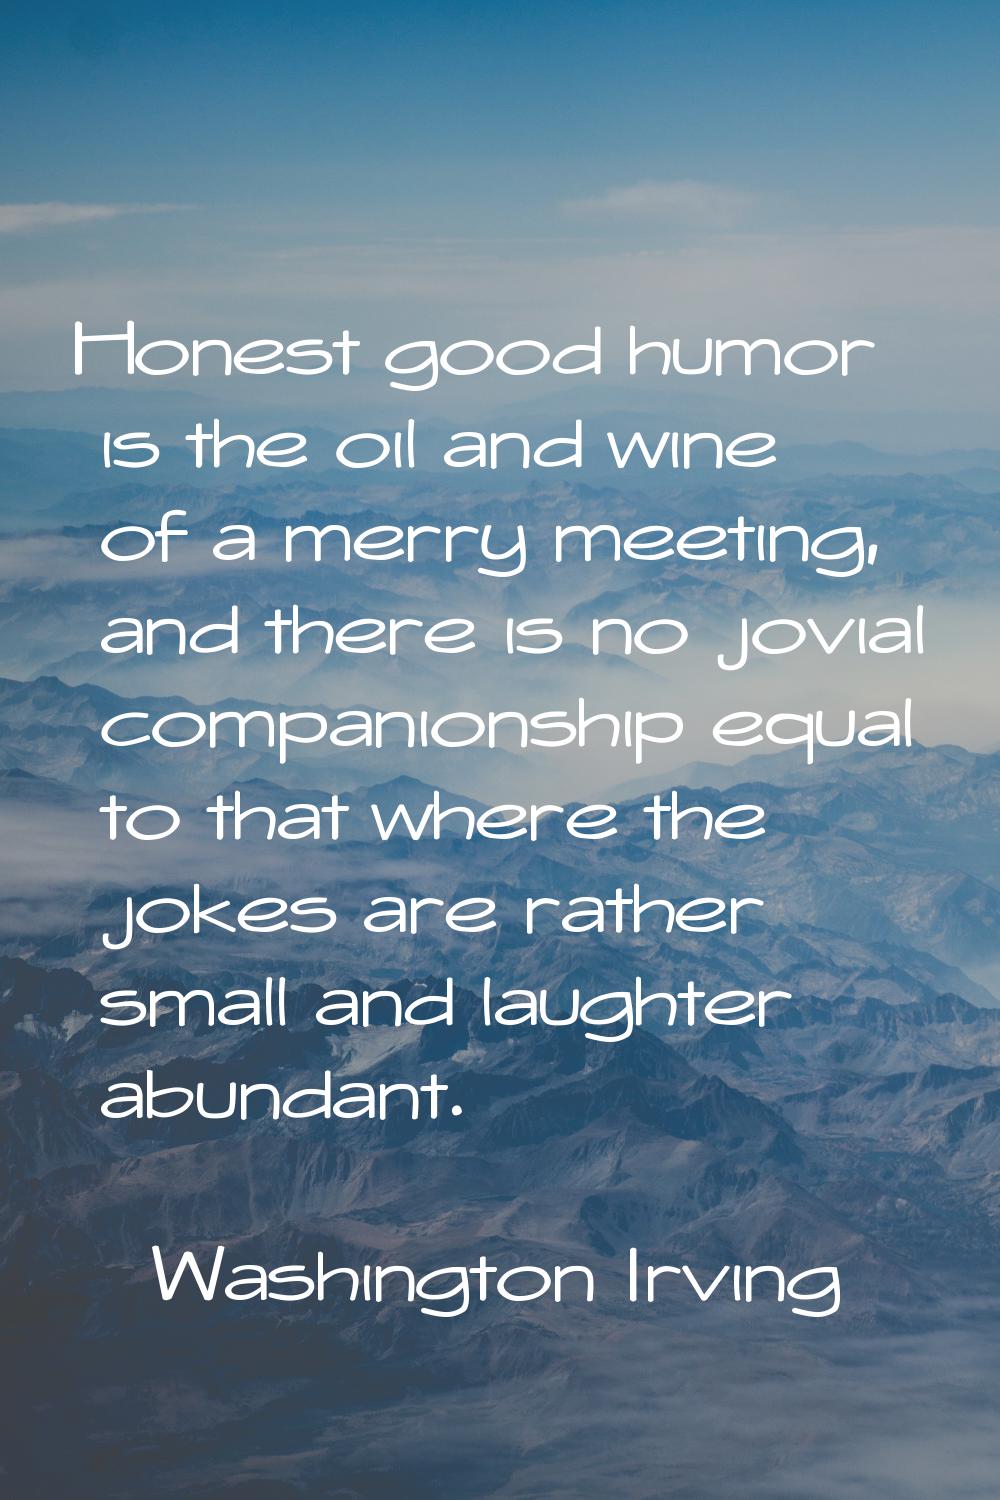 Honest good humor is the oil and wine of a merry meeting, and there is no jovial companionship equa